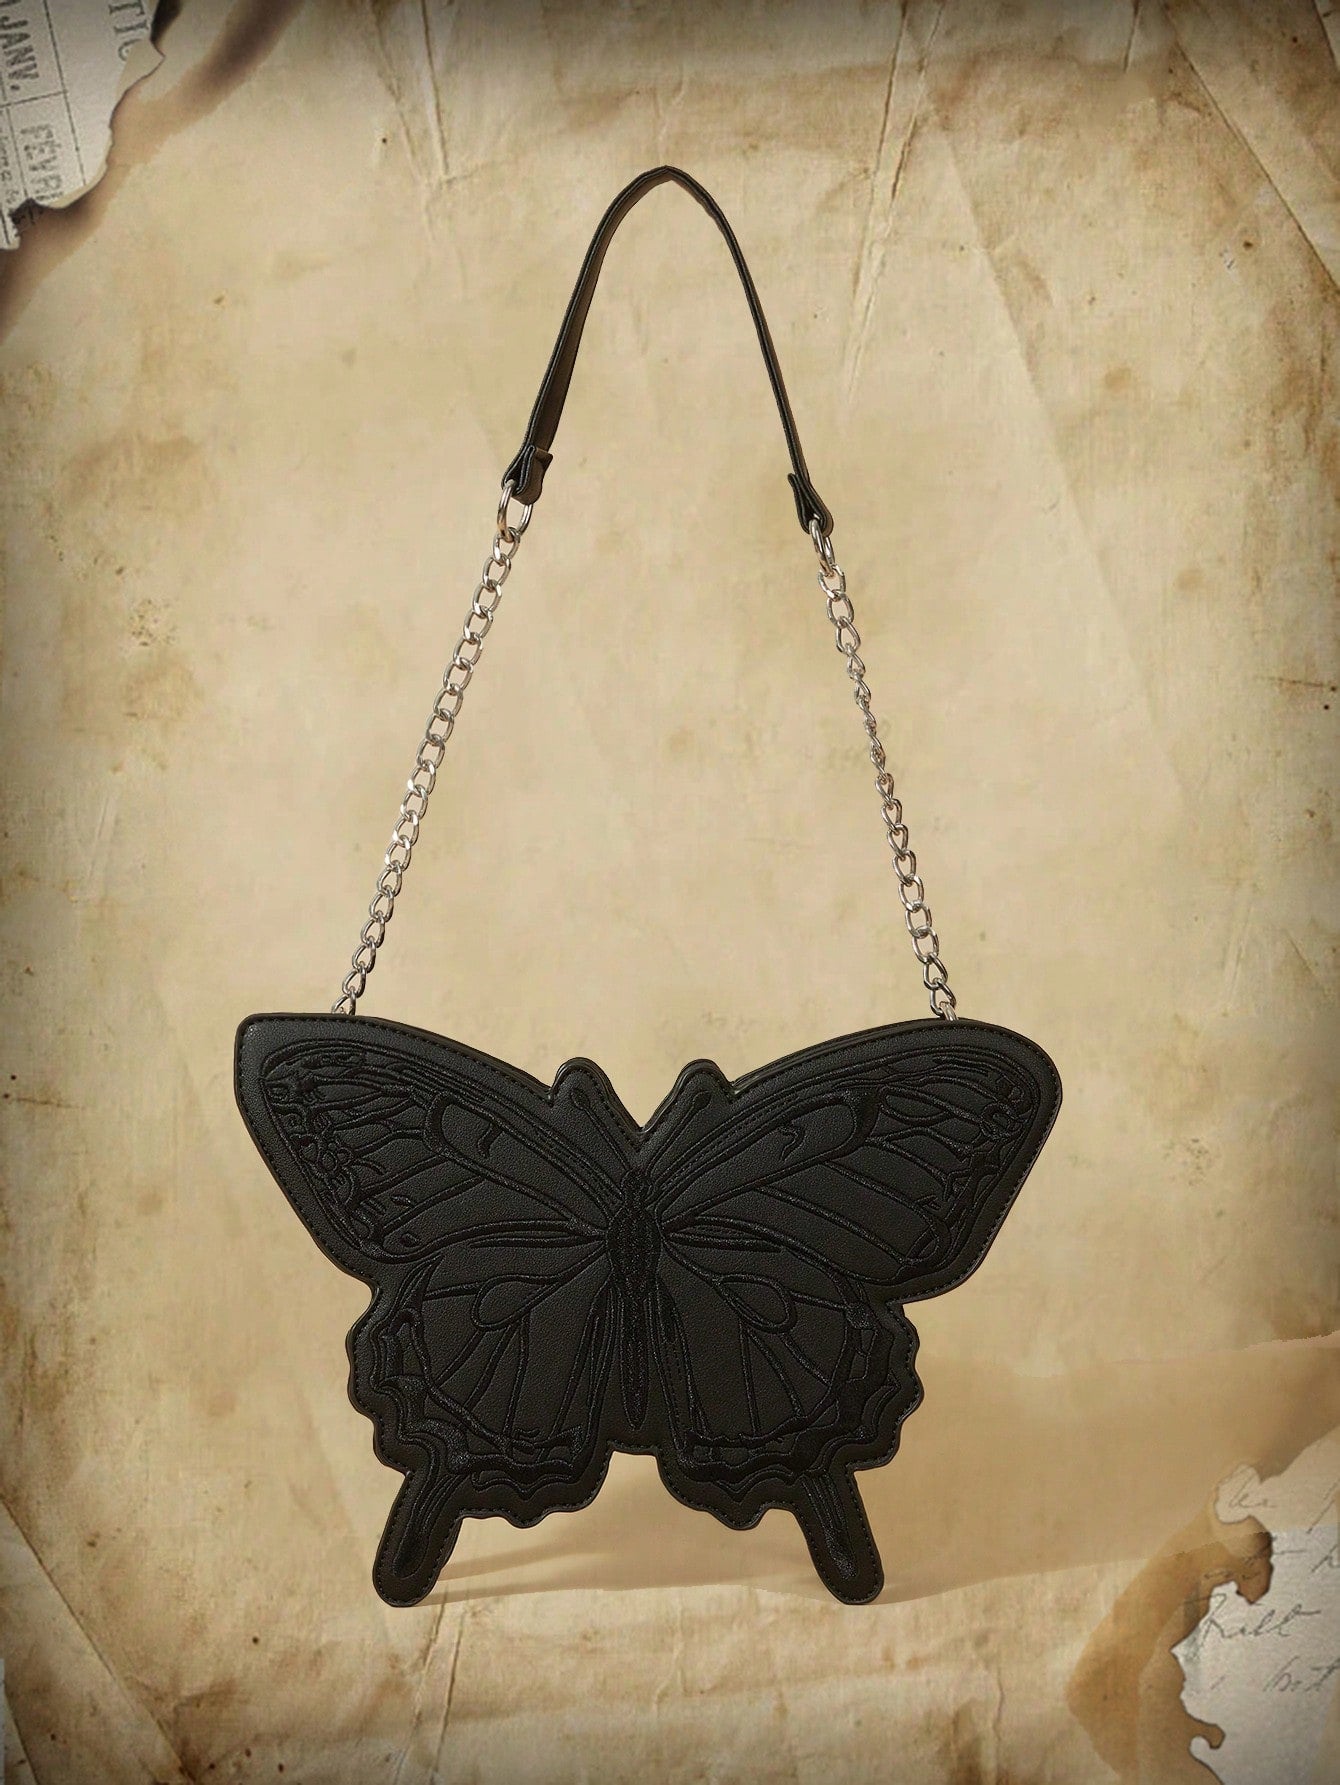 Fairycore Small Novelty Bag Fashion Butterfly Design